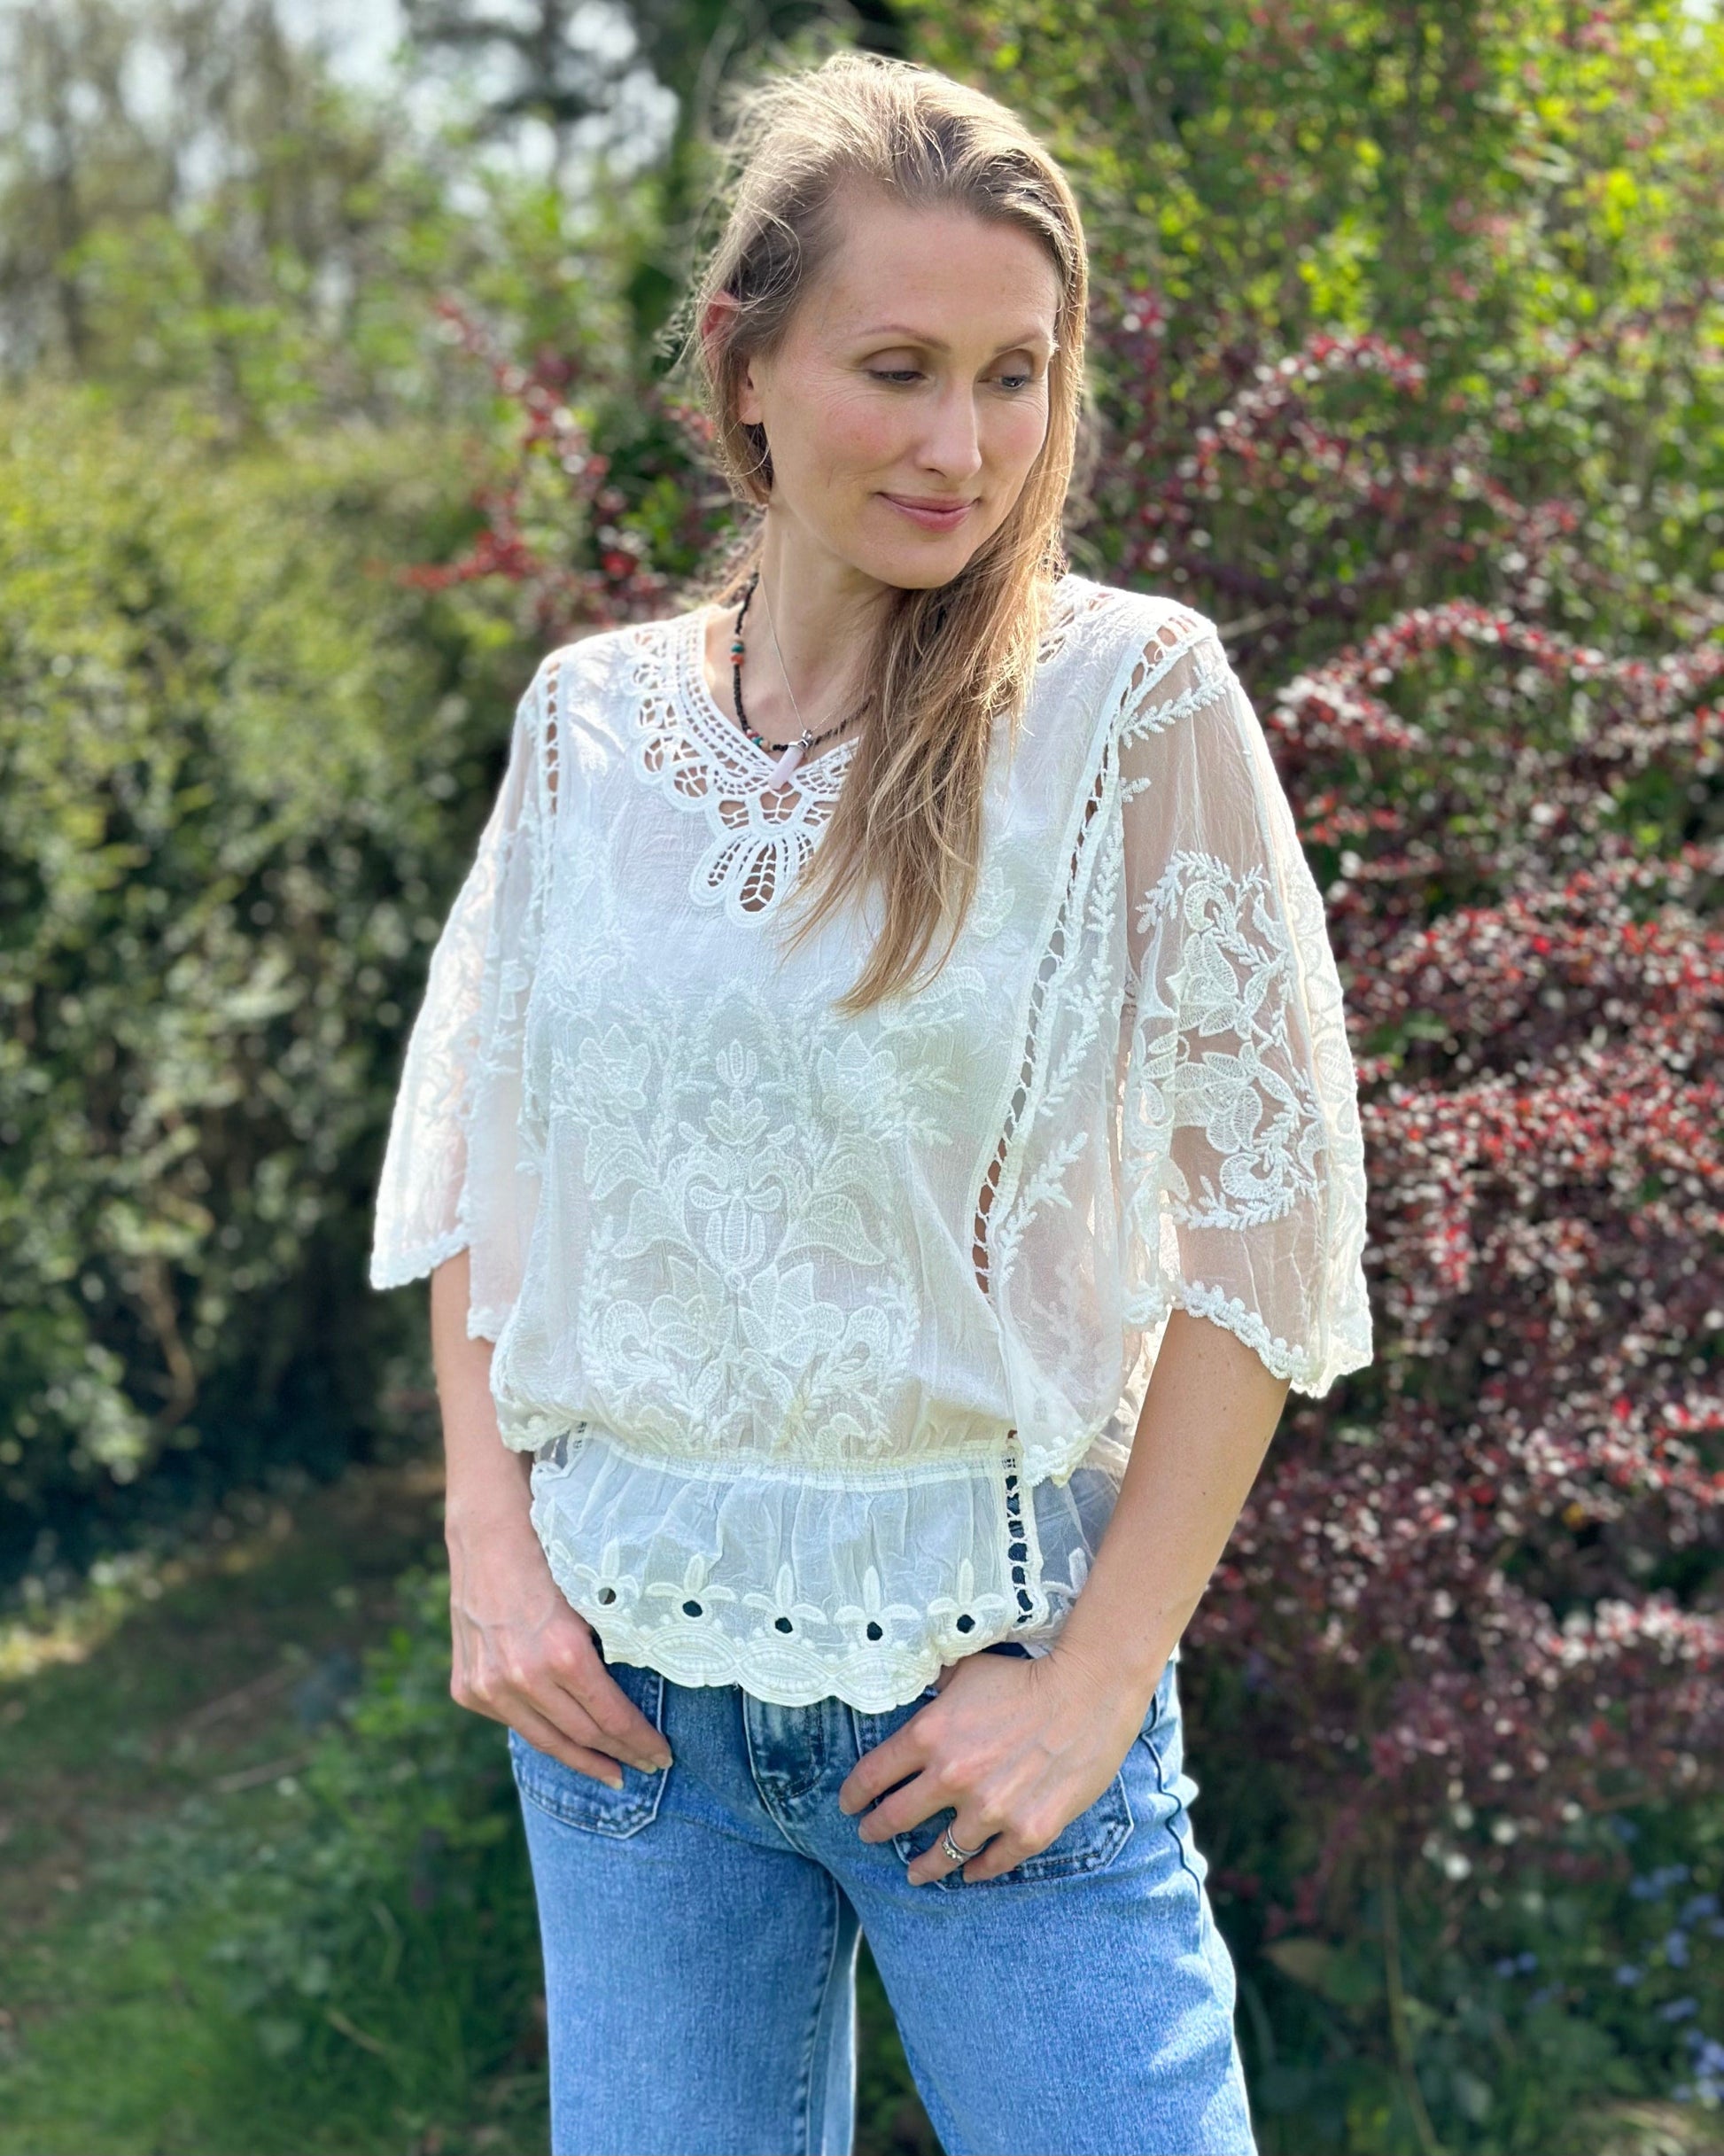 Floral Lace Butterfly Sleeve Top - Ivory